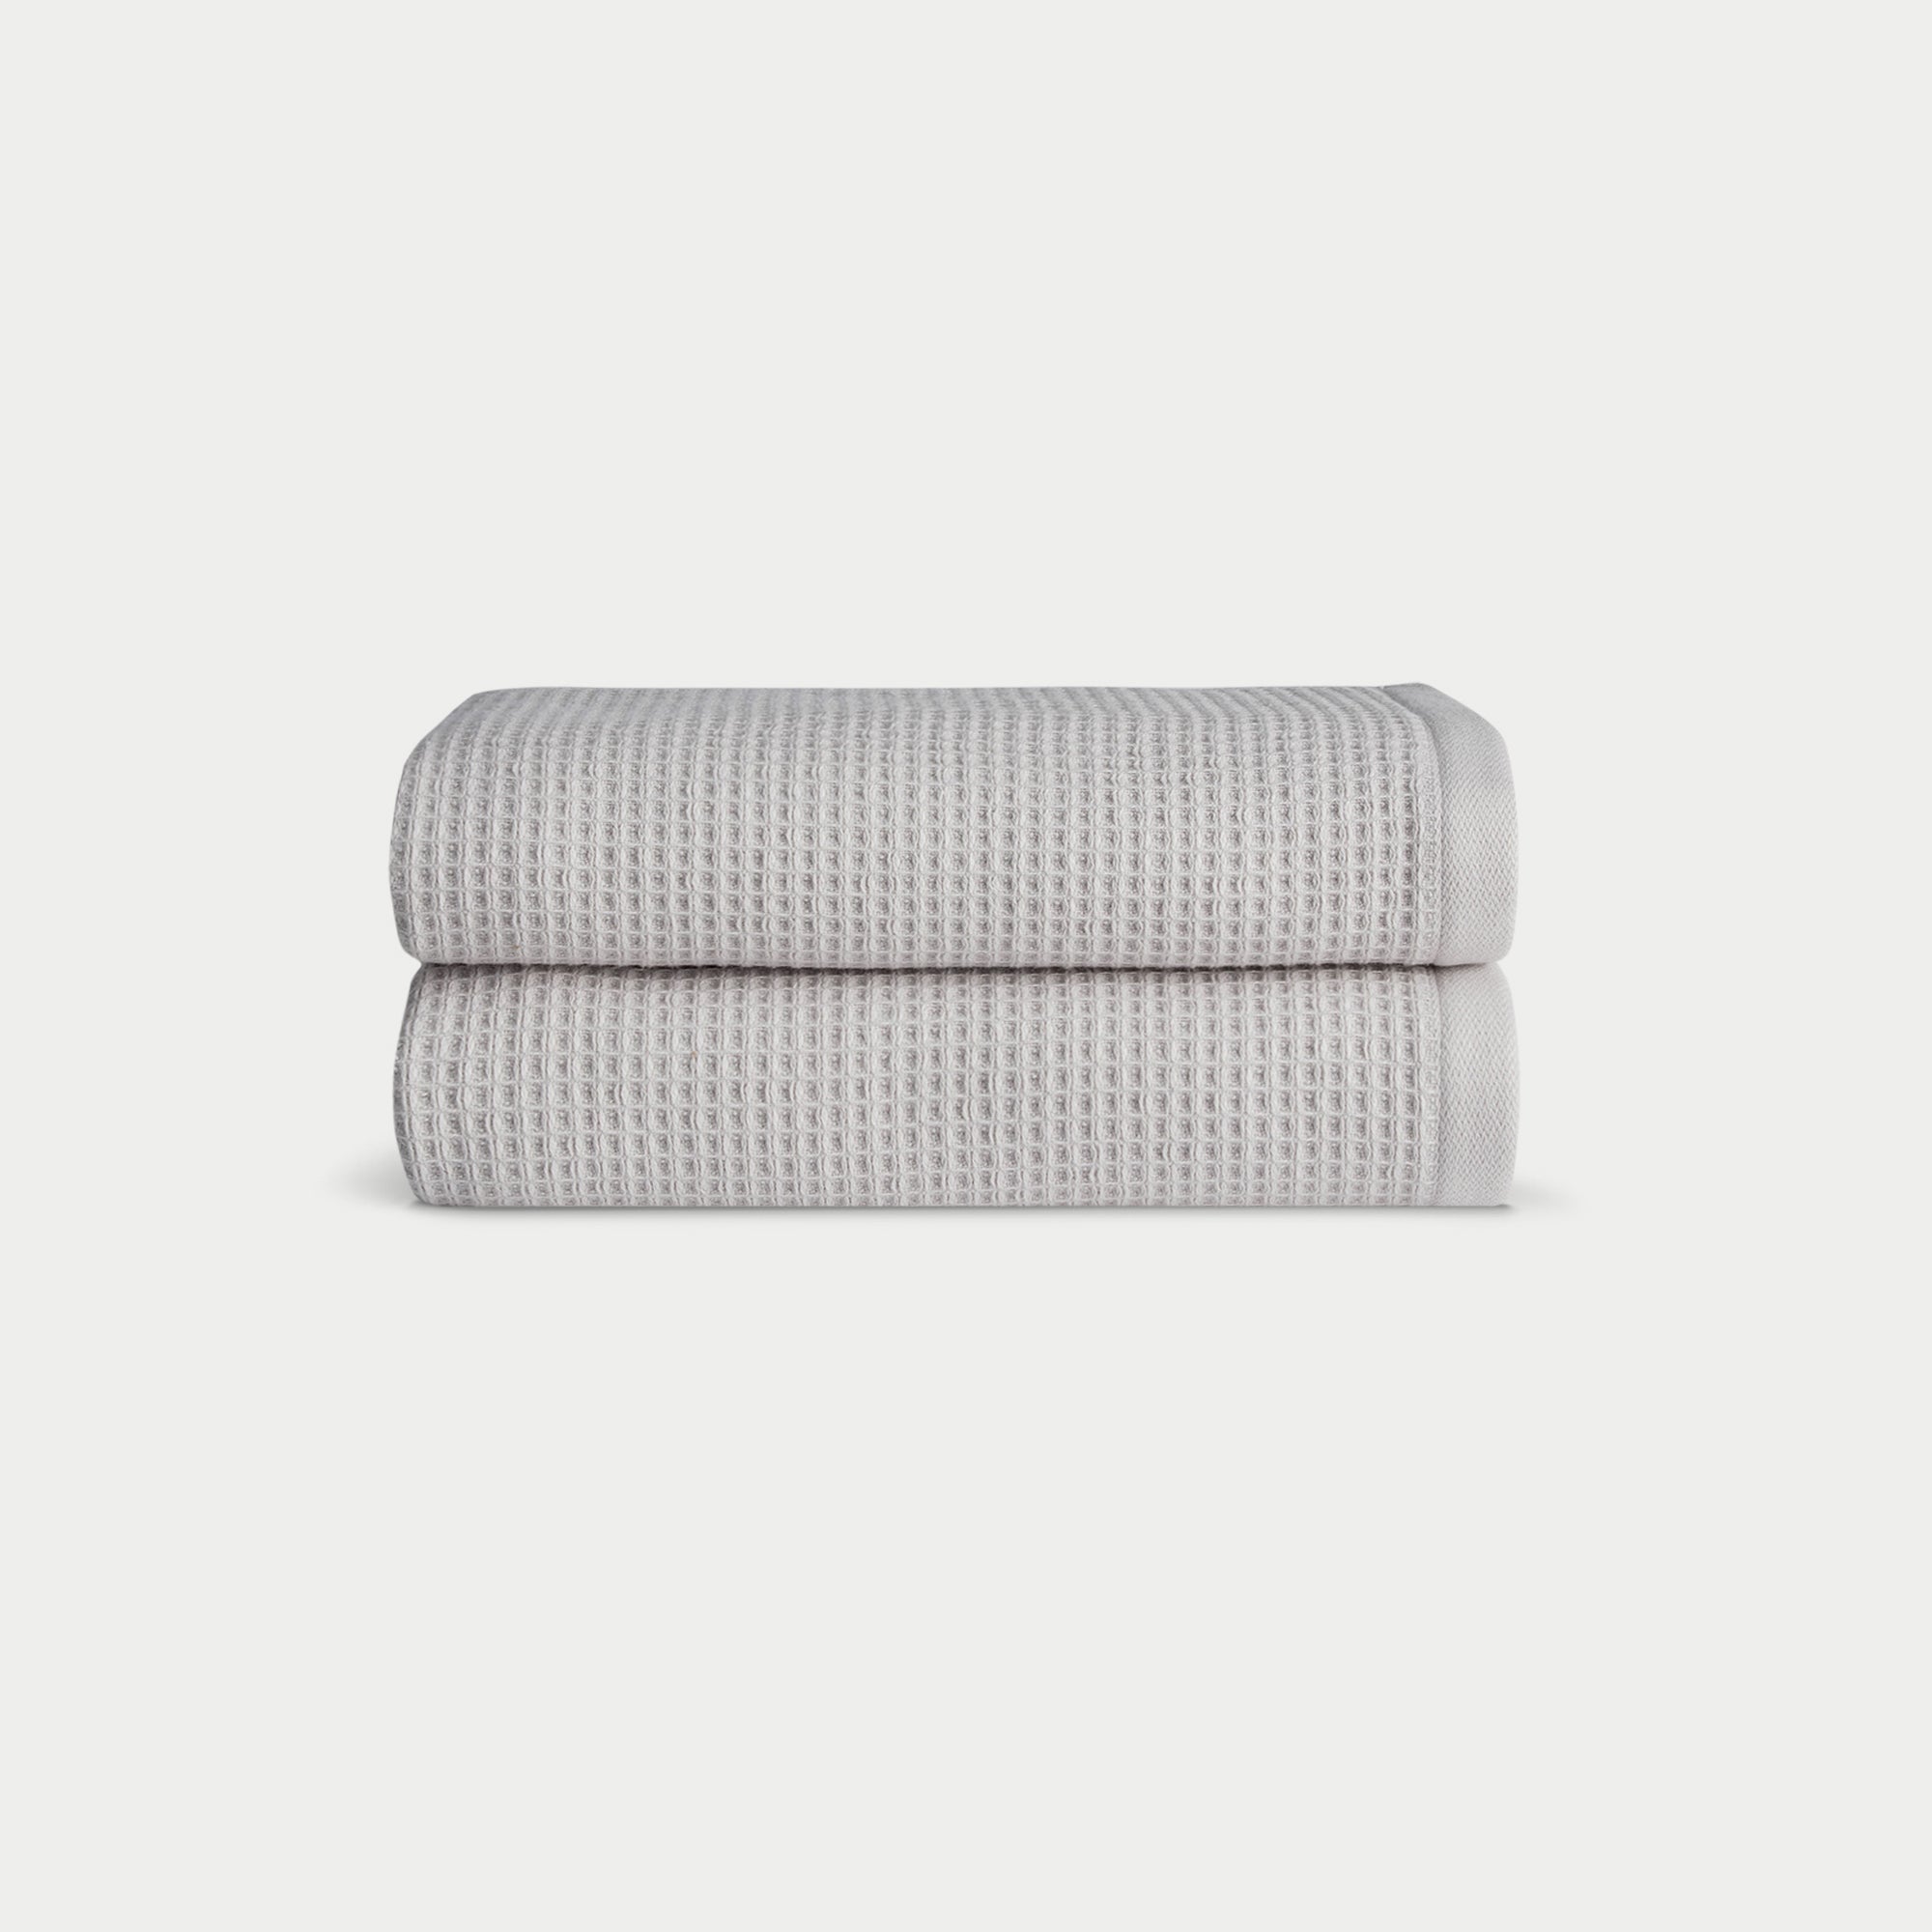 Light Grey Waffle Hand Towel set neatly folded. The photo was taken with a white background. |Color:Light Grey